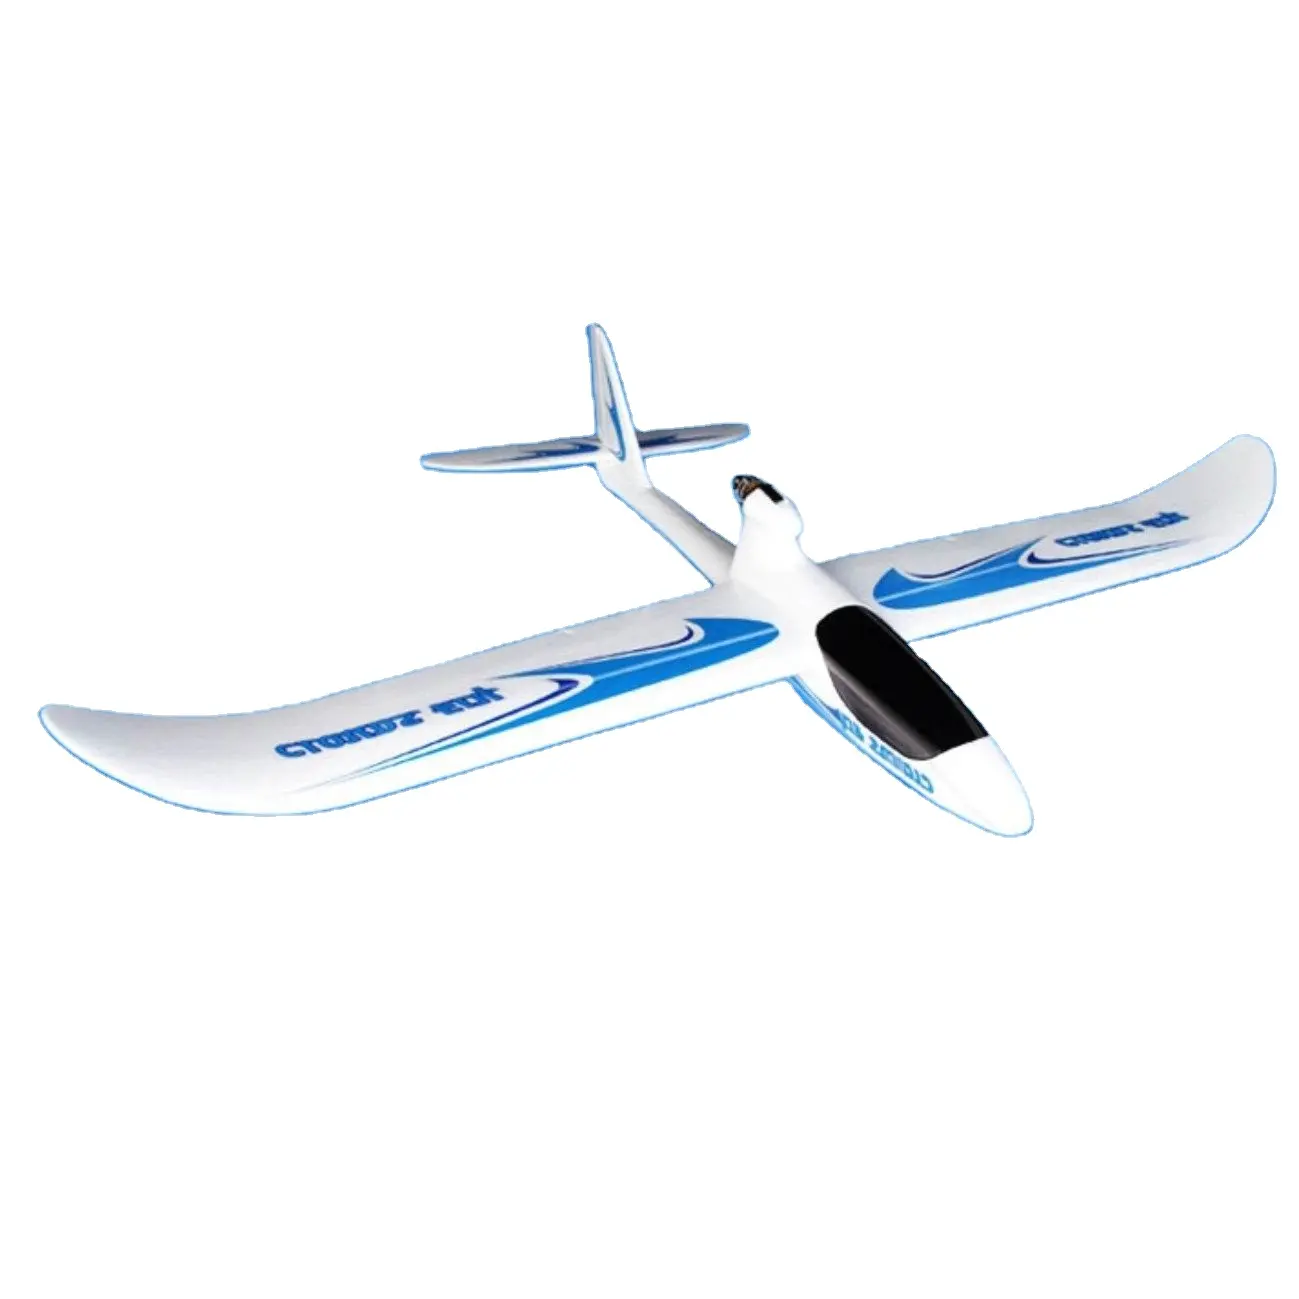 New Sailplane Battery Rc Electrical Fly Gliders Rc Electrical Fly Gliders Rc Hobby Plane For Adult